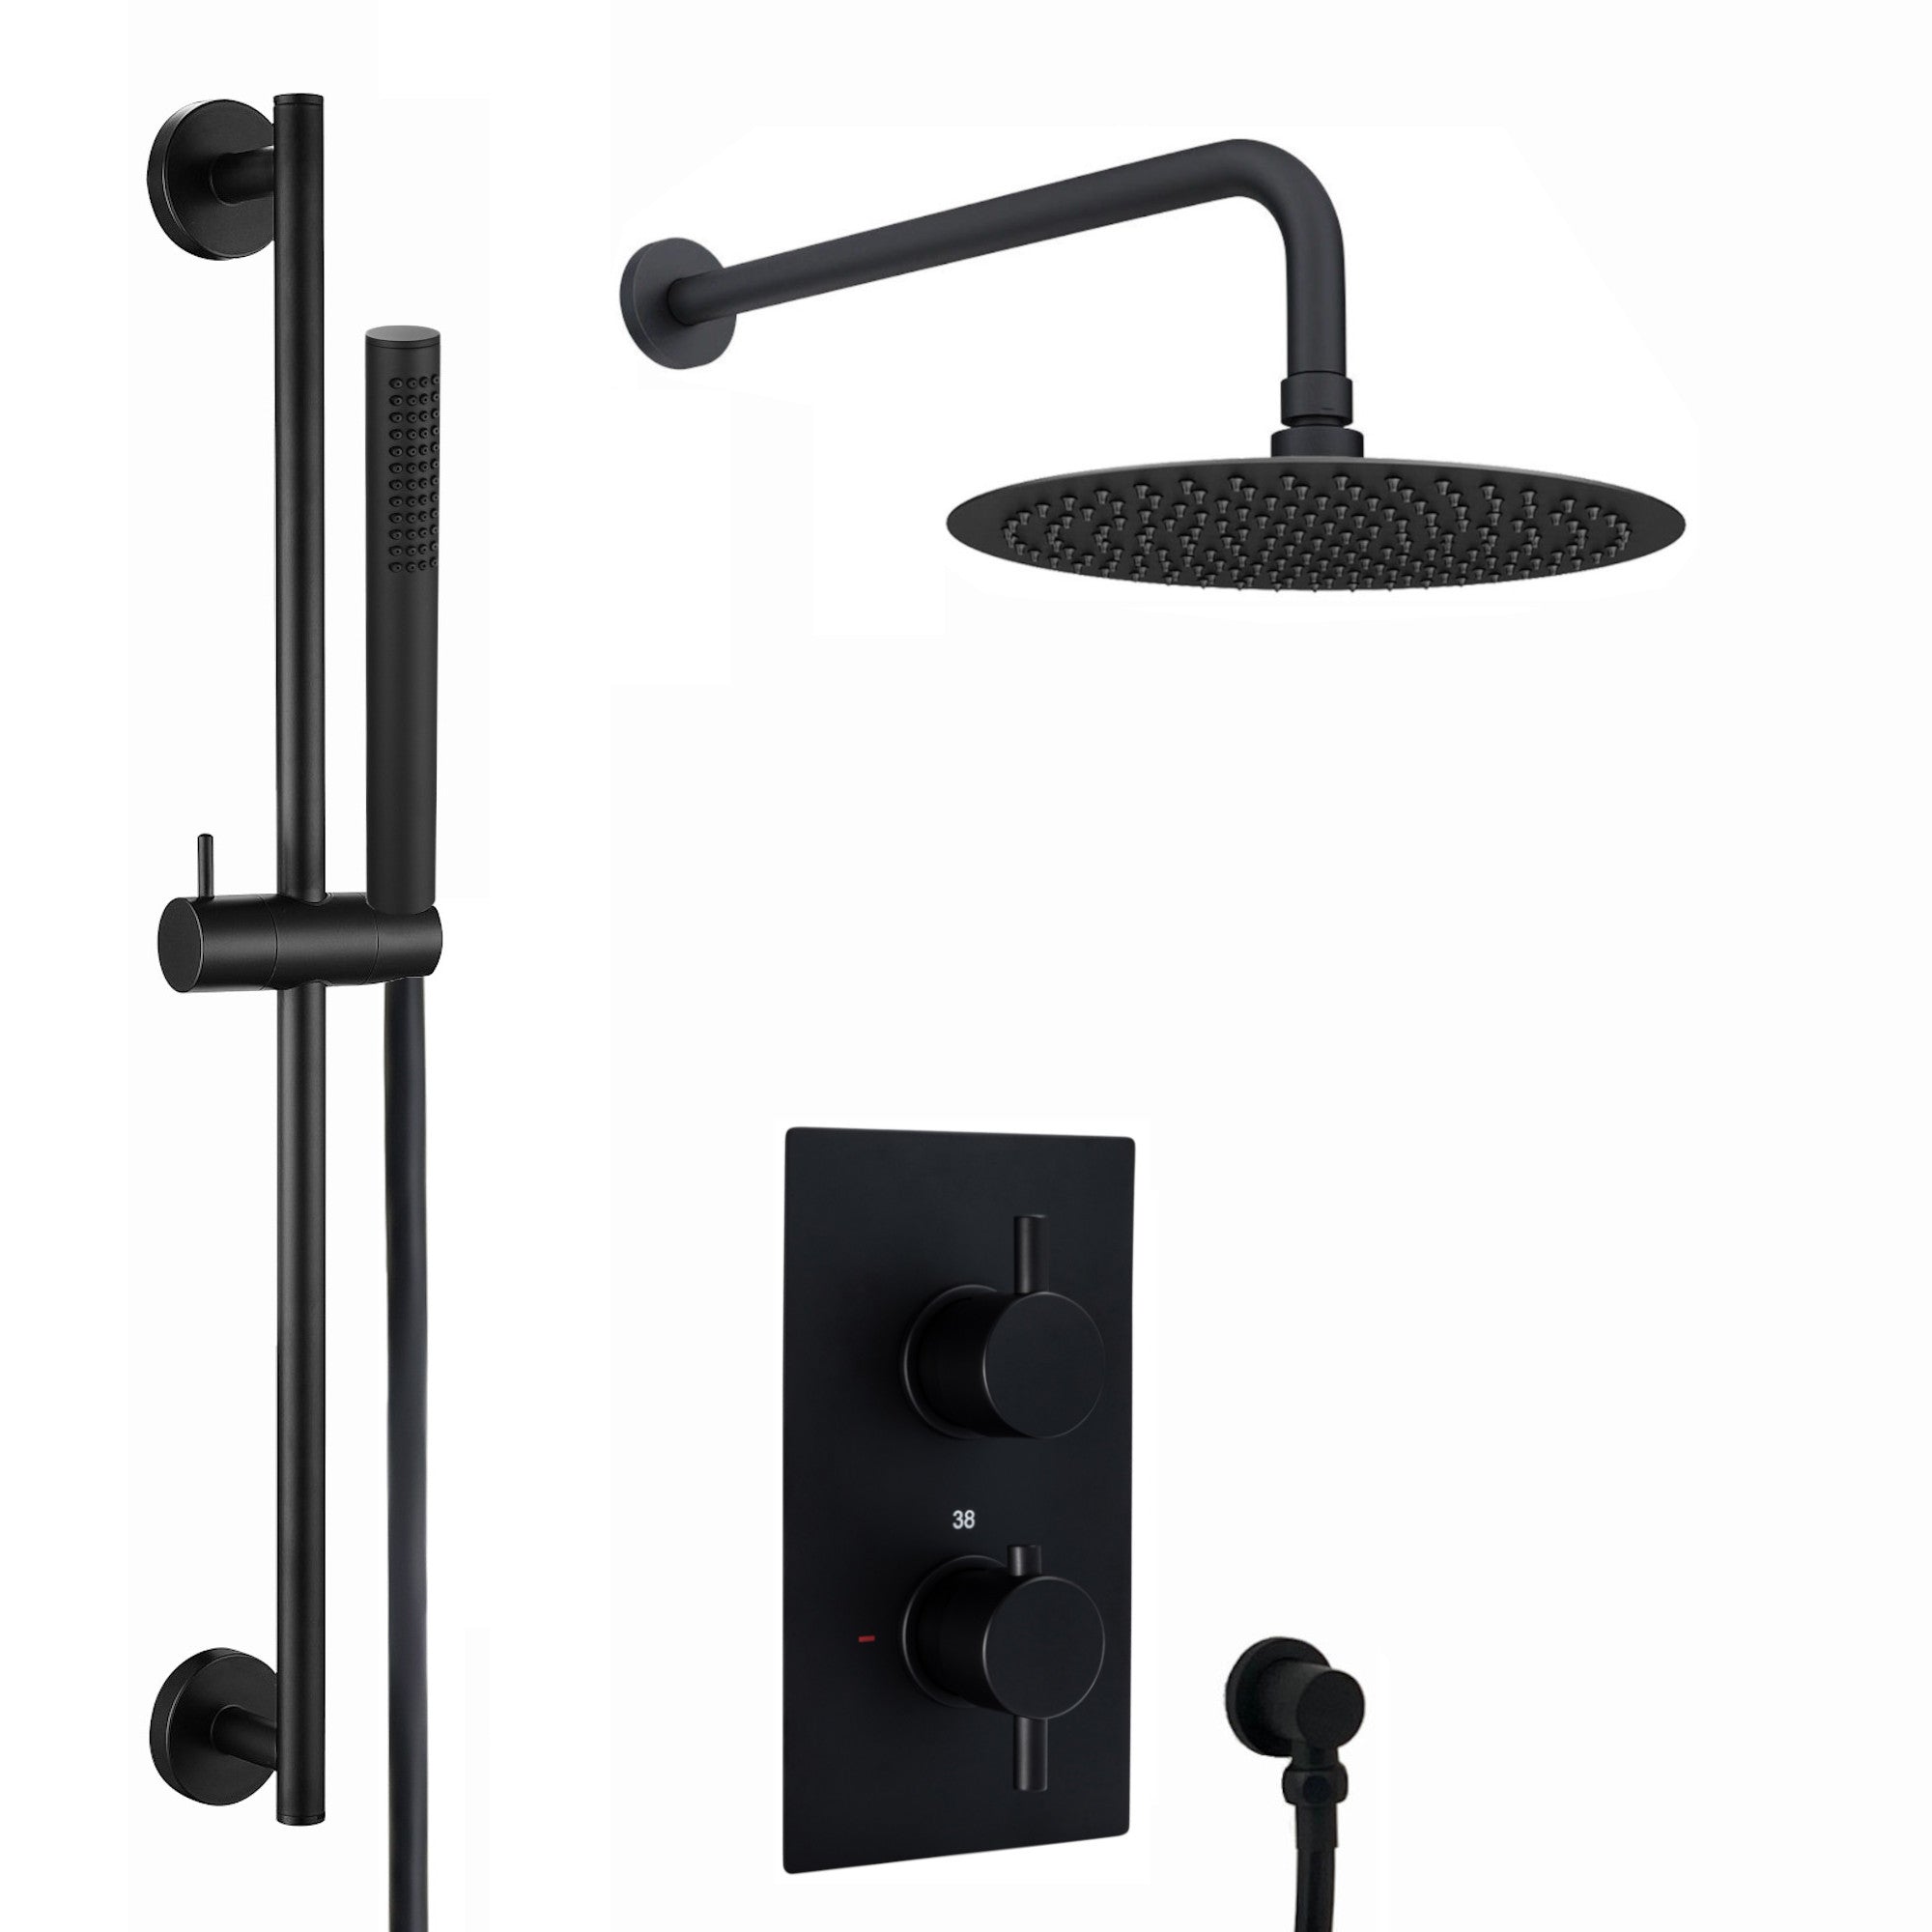 Venice Contemporary Round Concealed Thermostatic Shower Set Incl. Twin Valve, Wall Fixed 8" Shower Head, Slider Rail Kit - Matte Black (2 Outlet)